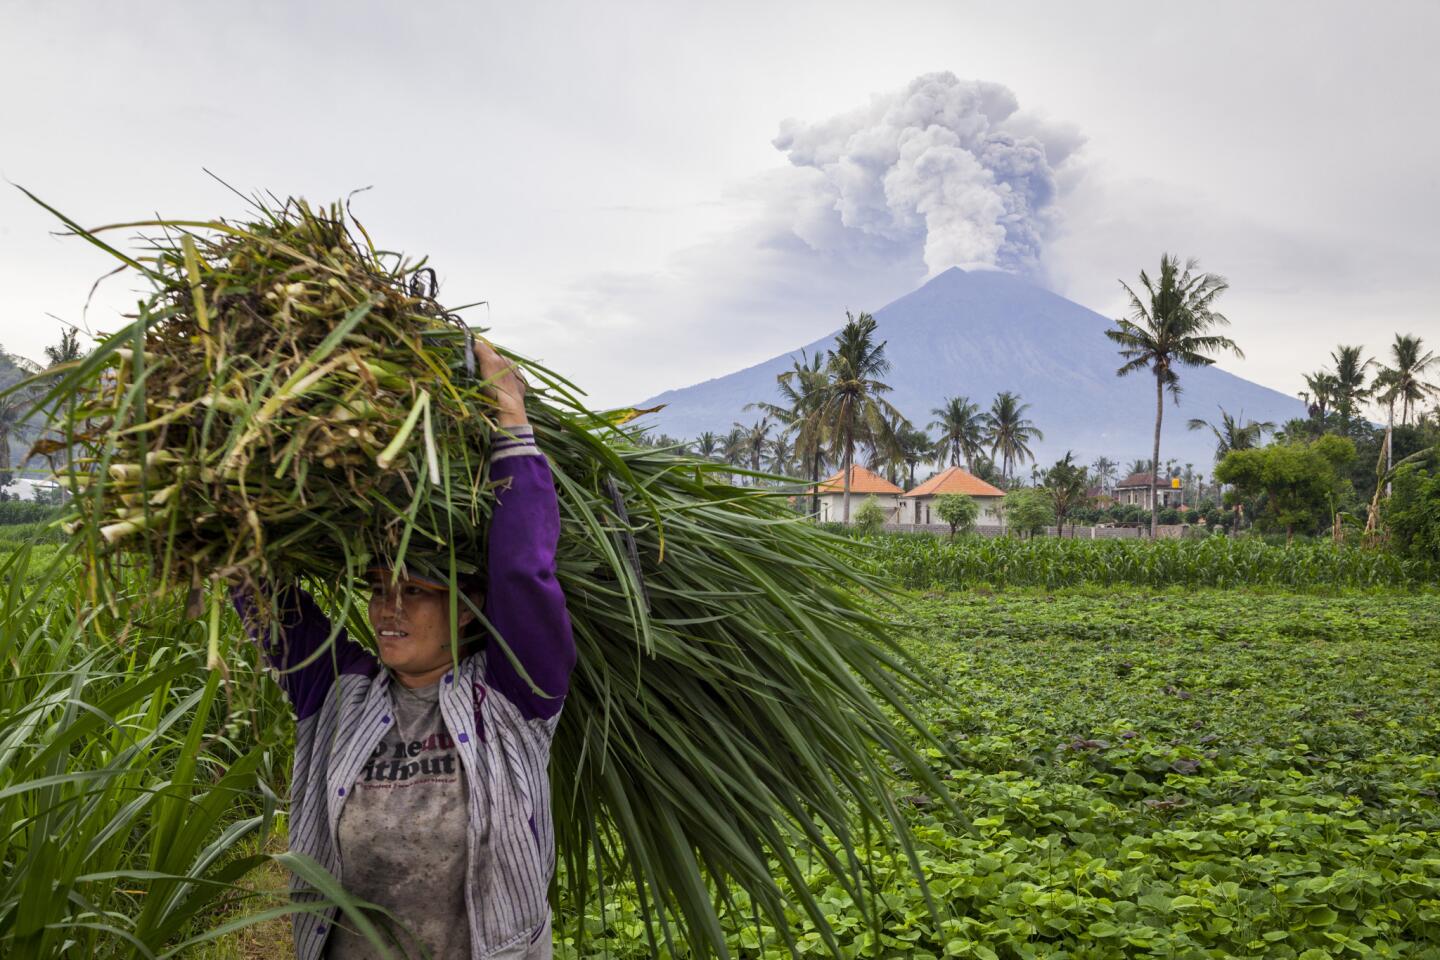 Eruption of Mt. Agung volcano on Bali strands thousands of travelers